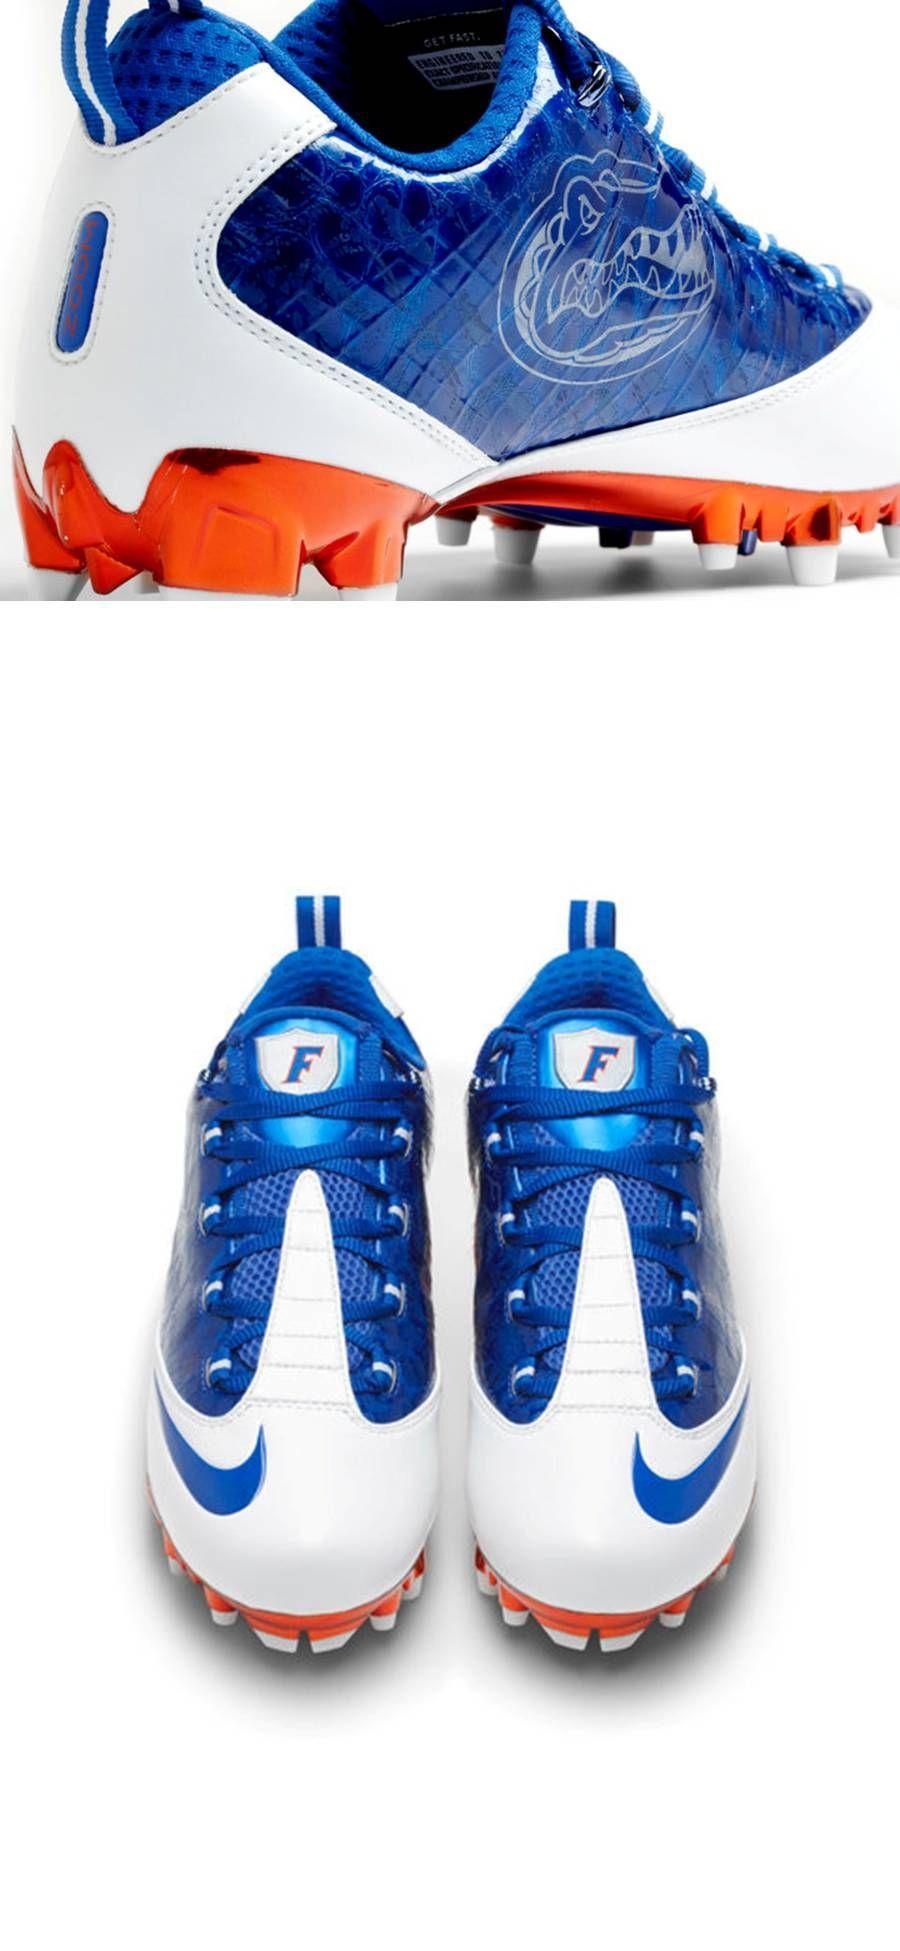 Cleats Logo - University of Florida Gators - nike game cleats with logo - 2 views ...